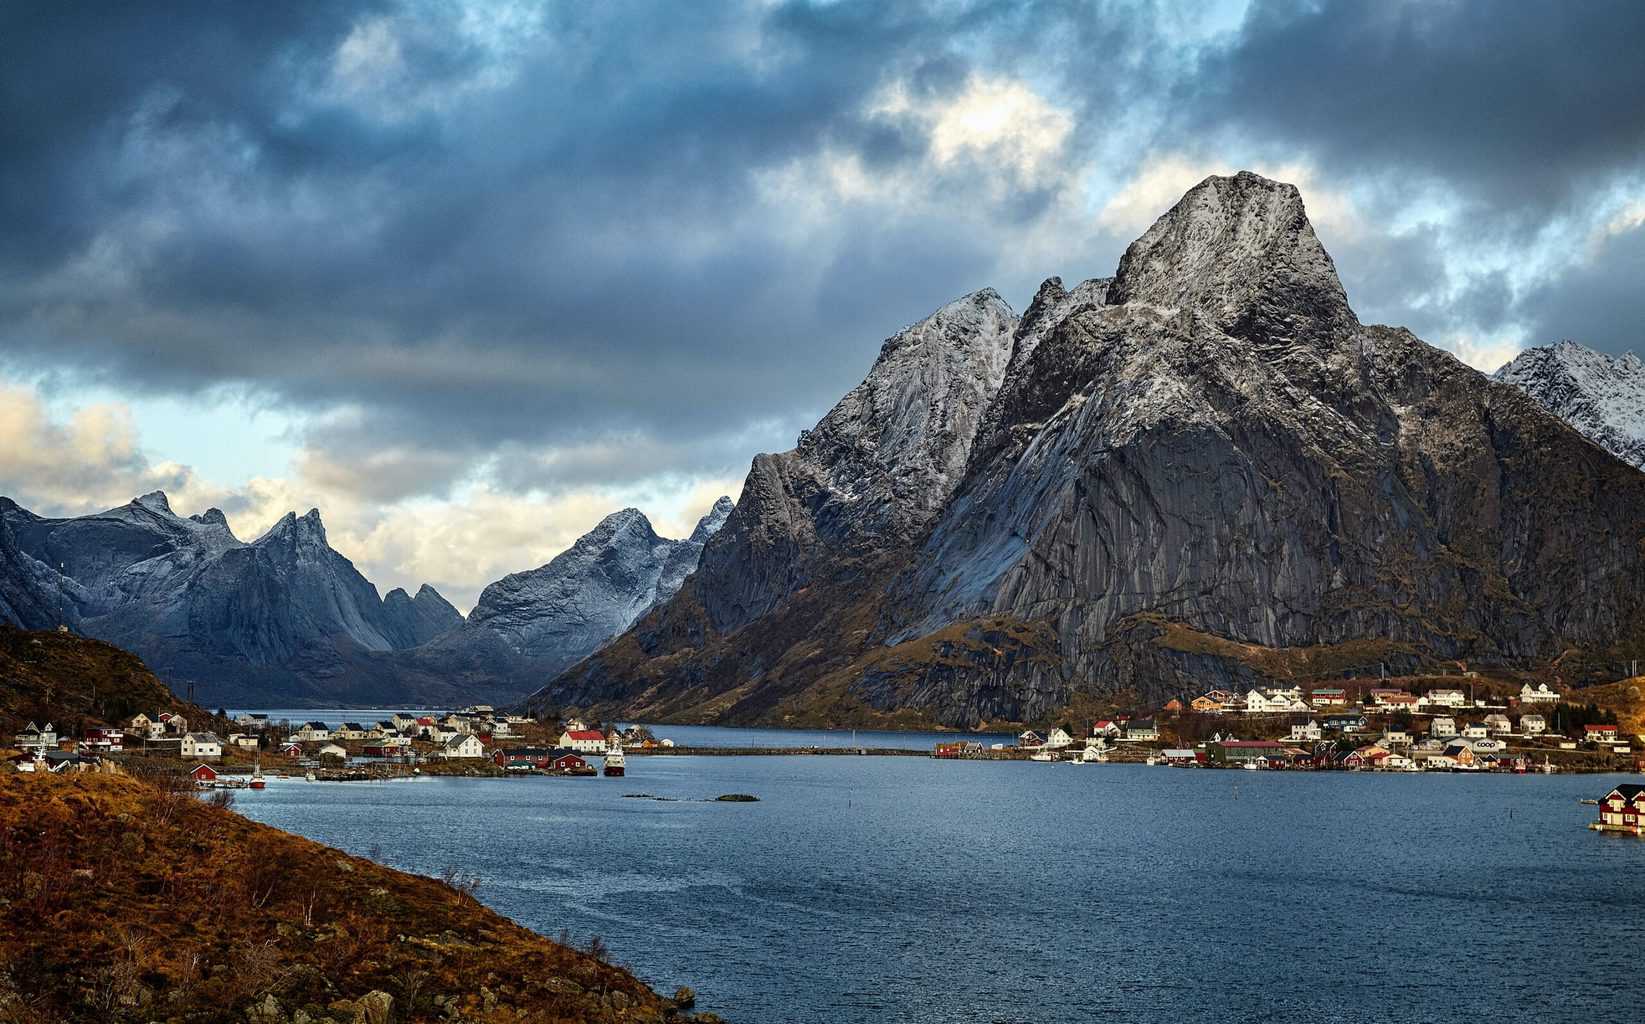 Some of the Most Interesting Things To See and Do in Norway